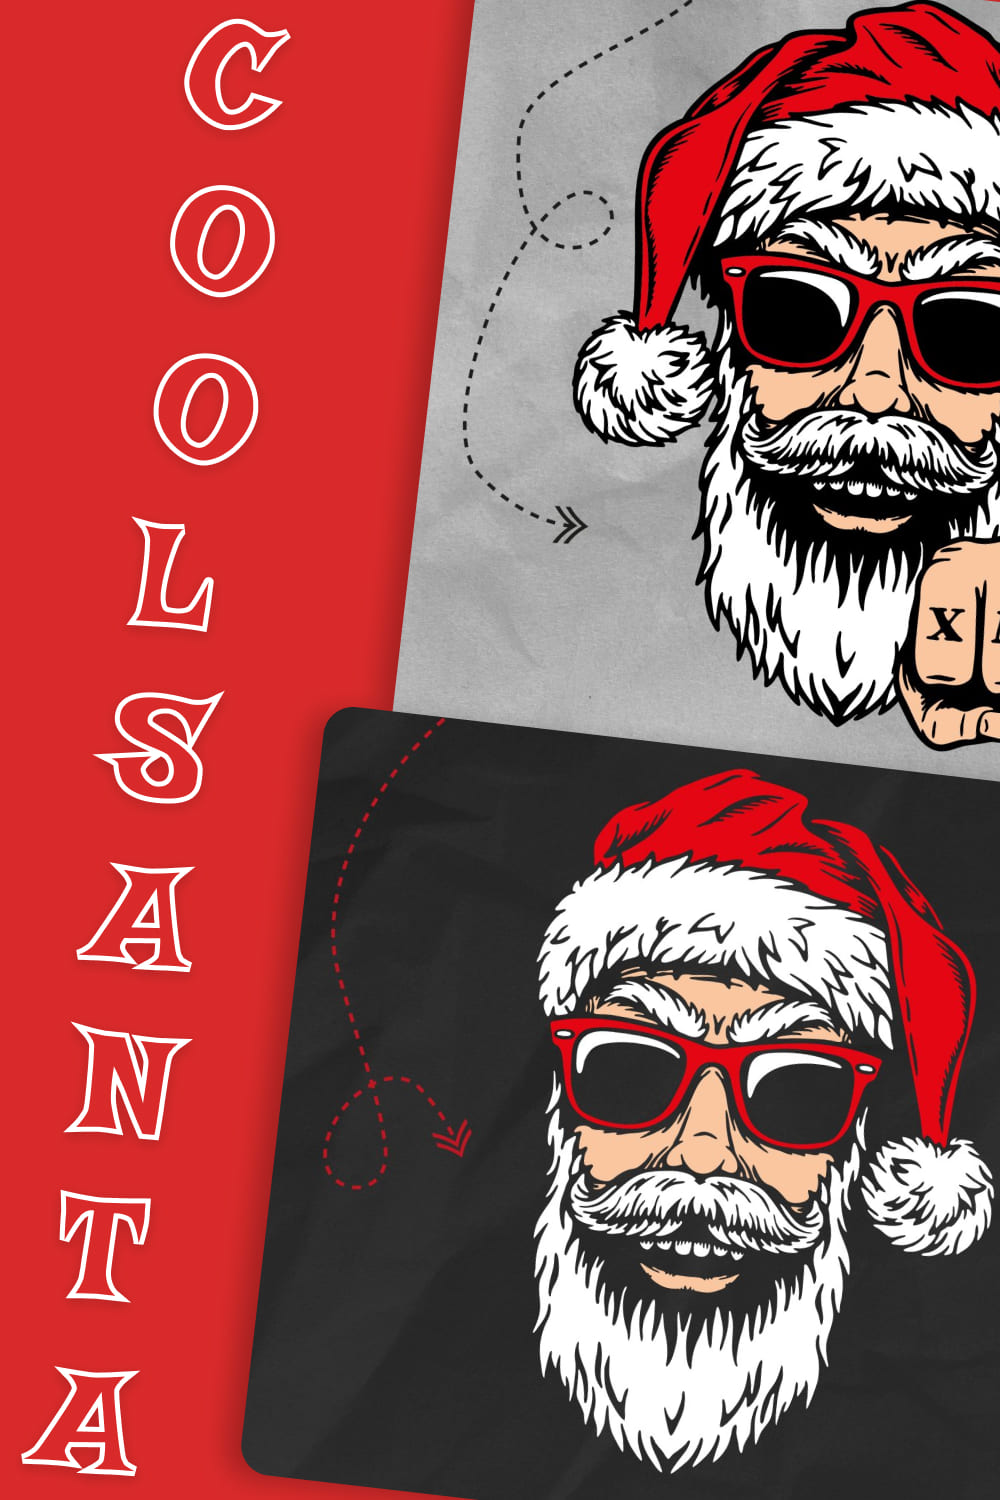 Bright image cover with cool santa in sunglasses.